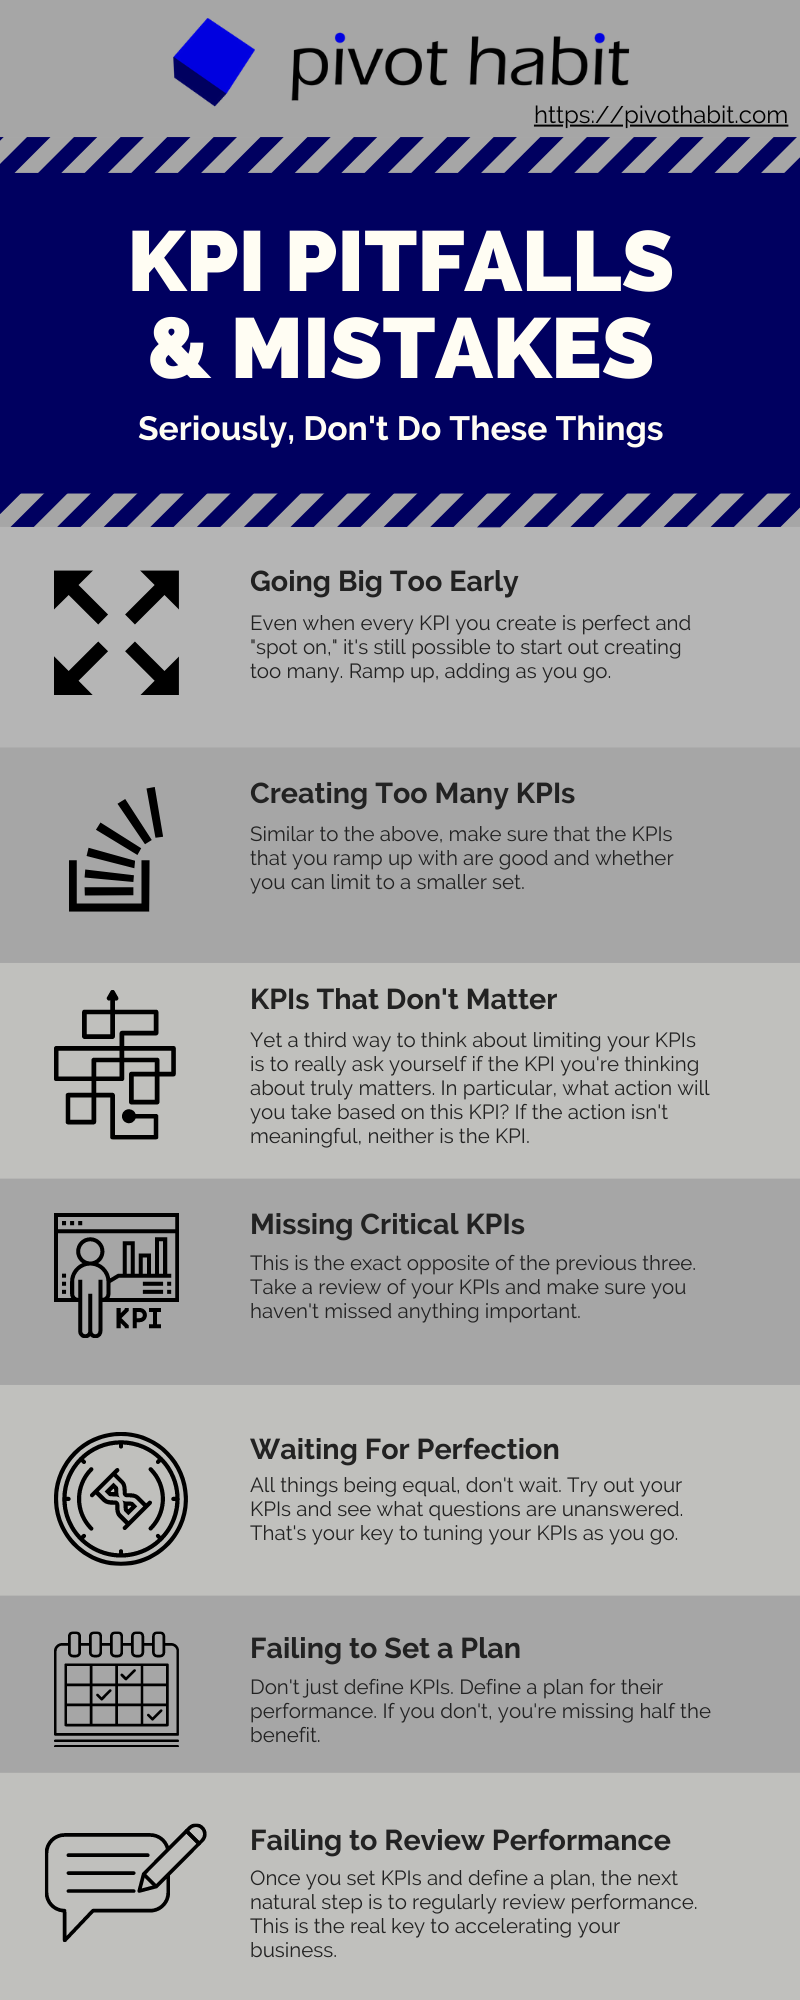 The top seven pitfalls and mistakes to avoid when using KPIs.